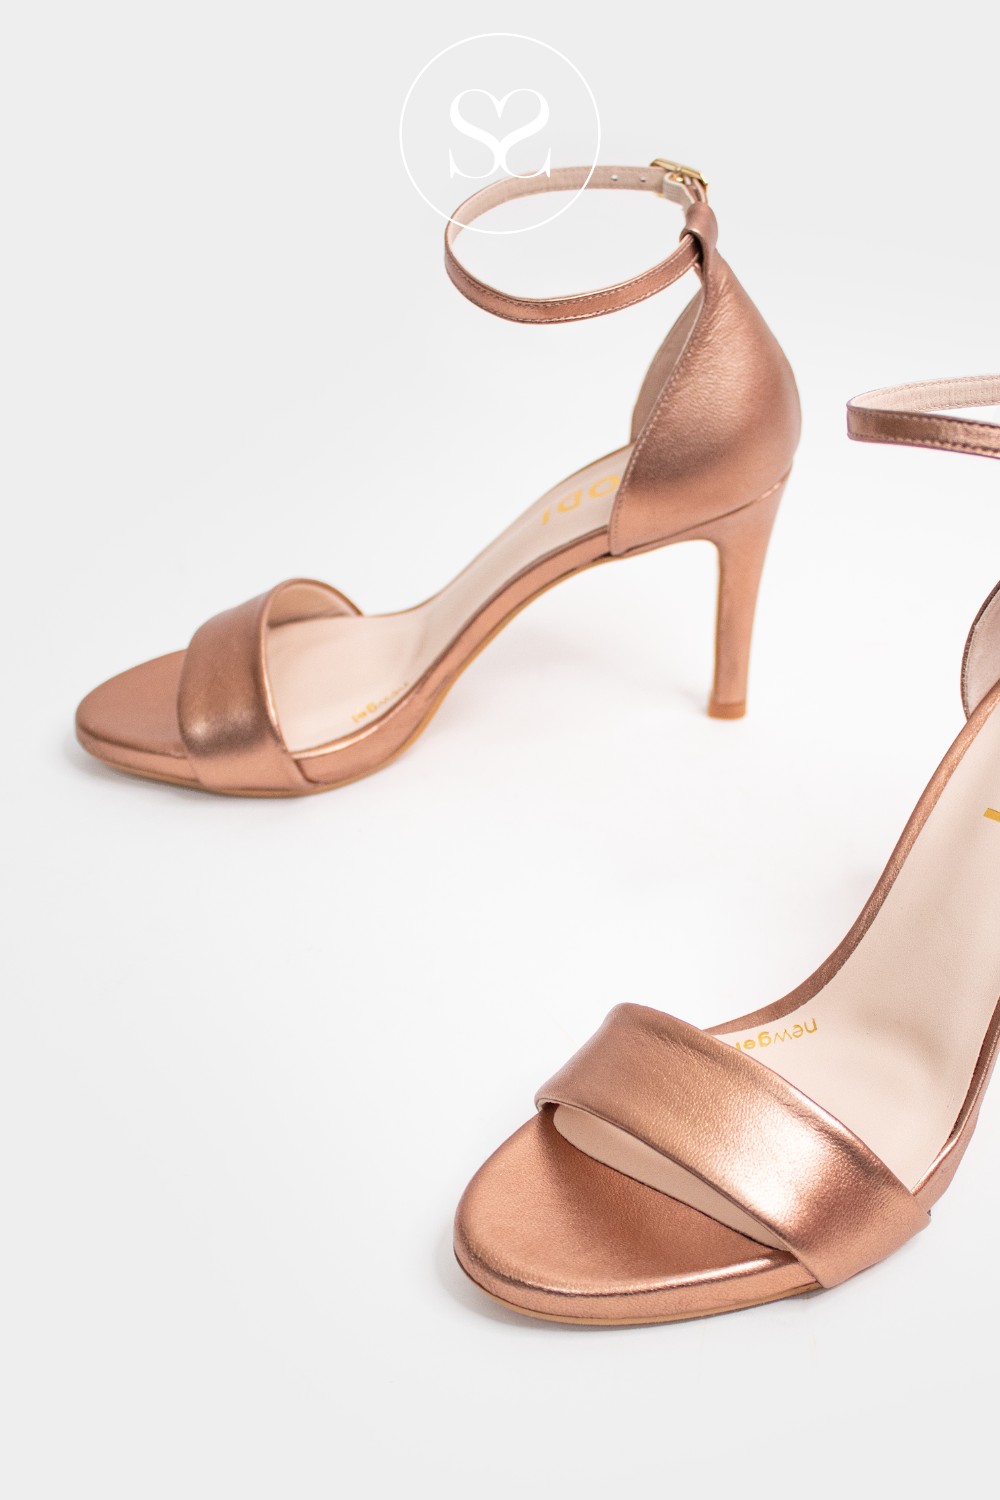 LODI BARELY THERE HEELED SANDALS IN ROSE GOLD / COPPER COLOUR